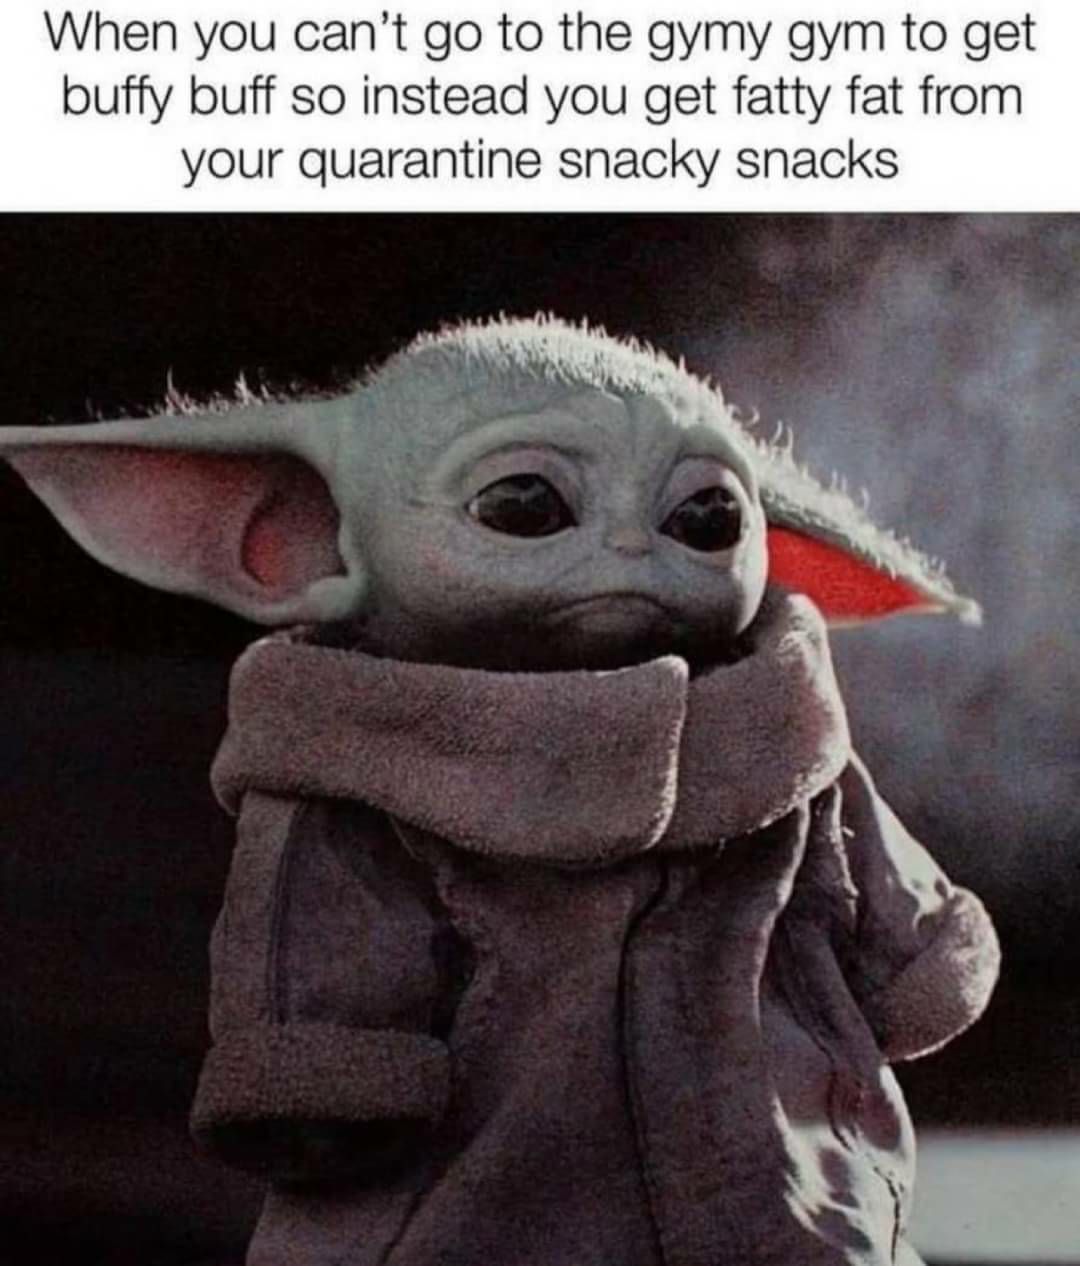 baby yoda sad - When you can't go to the gymy gym to get buffy buff so instead you get fatty fat from your quarantine snacky snacks